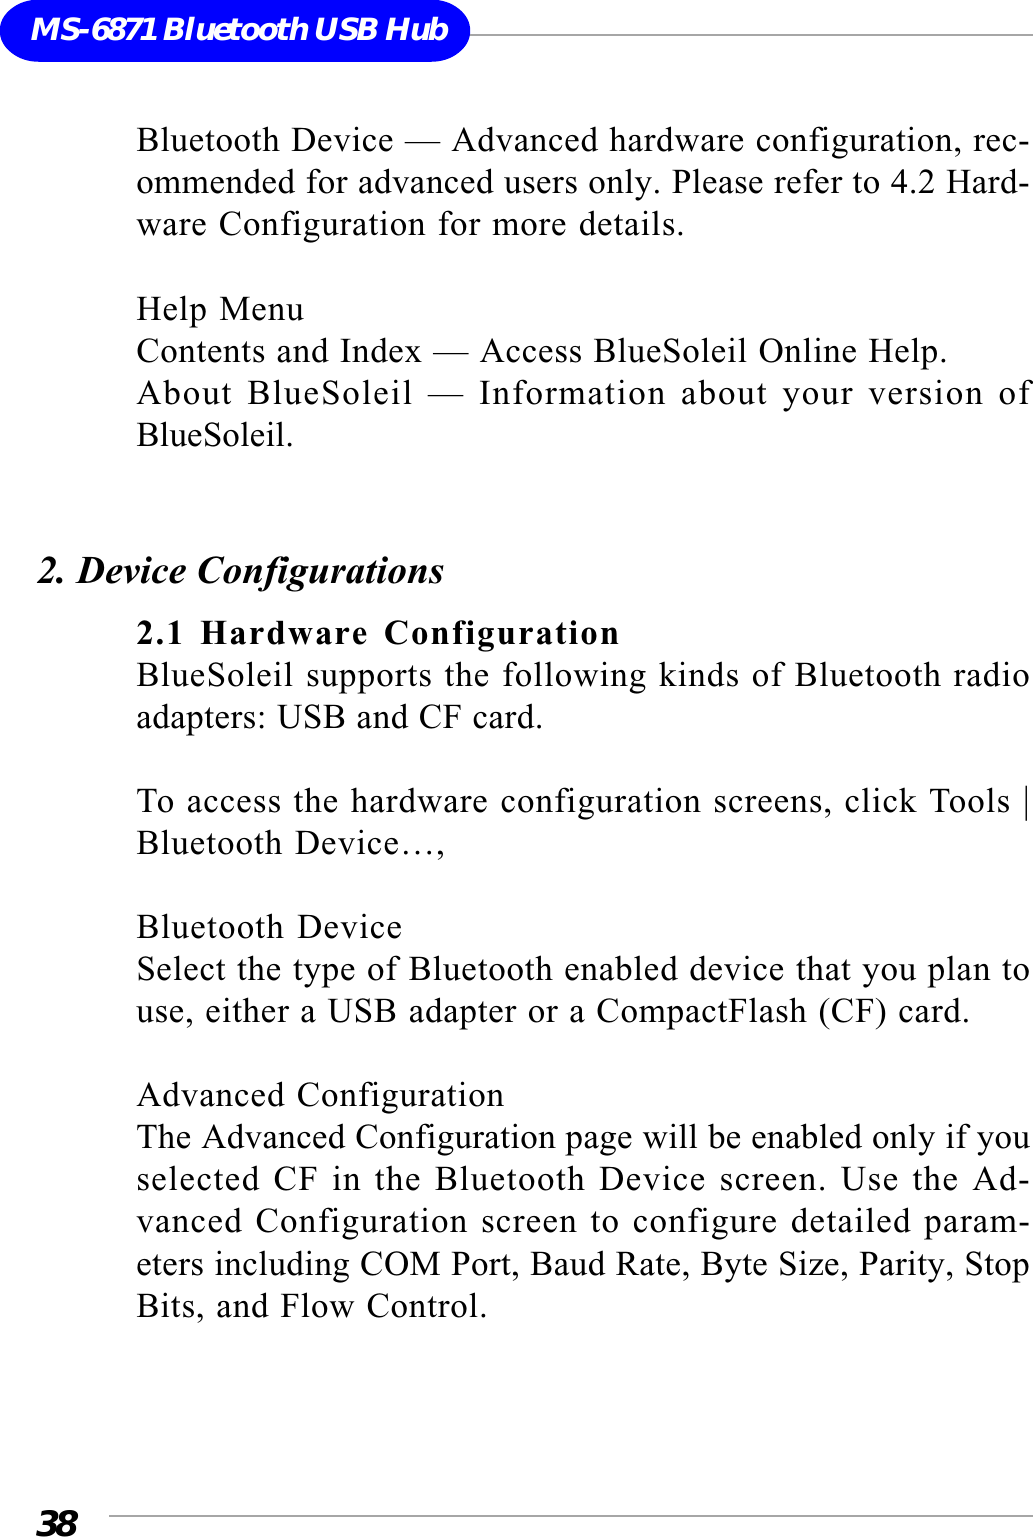 38MS-6871 Bluetooth USB HubBluetooth Device — Advanced hardware configuration, rec-ommended for advanced users only. Please refer to 4.2 Hard-ware Configuration for more details.Help MenuContents and Index — Access BlueSoleil Online Help.About BlueSoleil — Information about your version ofBlueSoleil.2. Device Configurations2.1 Hardware ConfigurationBlueSoleil supports the following kinds of Bluetooth radioadapters: USB and CF card.To access the hardware configuration screens, click Tools |Bluetooth Device…,Bluetooth DeviceSelect the type of Bluetooth enabled device that you plan touse, either a USB adapter or a CompactFlash (CF) card.Advanced ConfigurationThe Advanced Configuration page will be enabled only if youselected CF in the Bluetooth Device screen. Use the Ad-vanced Configuration screen to configure detailed param-eters including COM Port, Baud Rate, Byte Size, Parity, StopBits, and Flow Control.